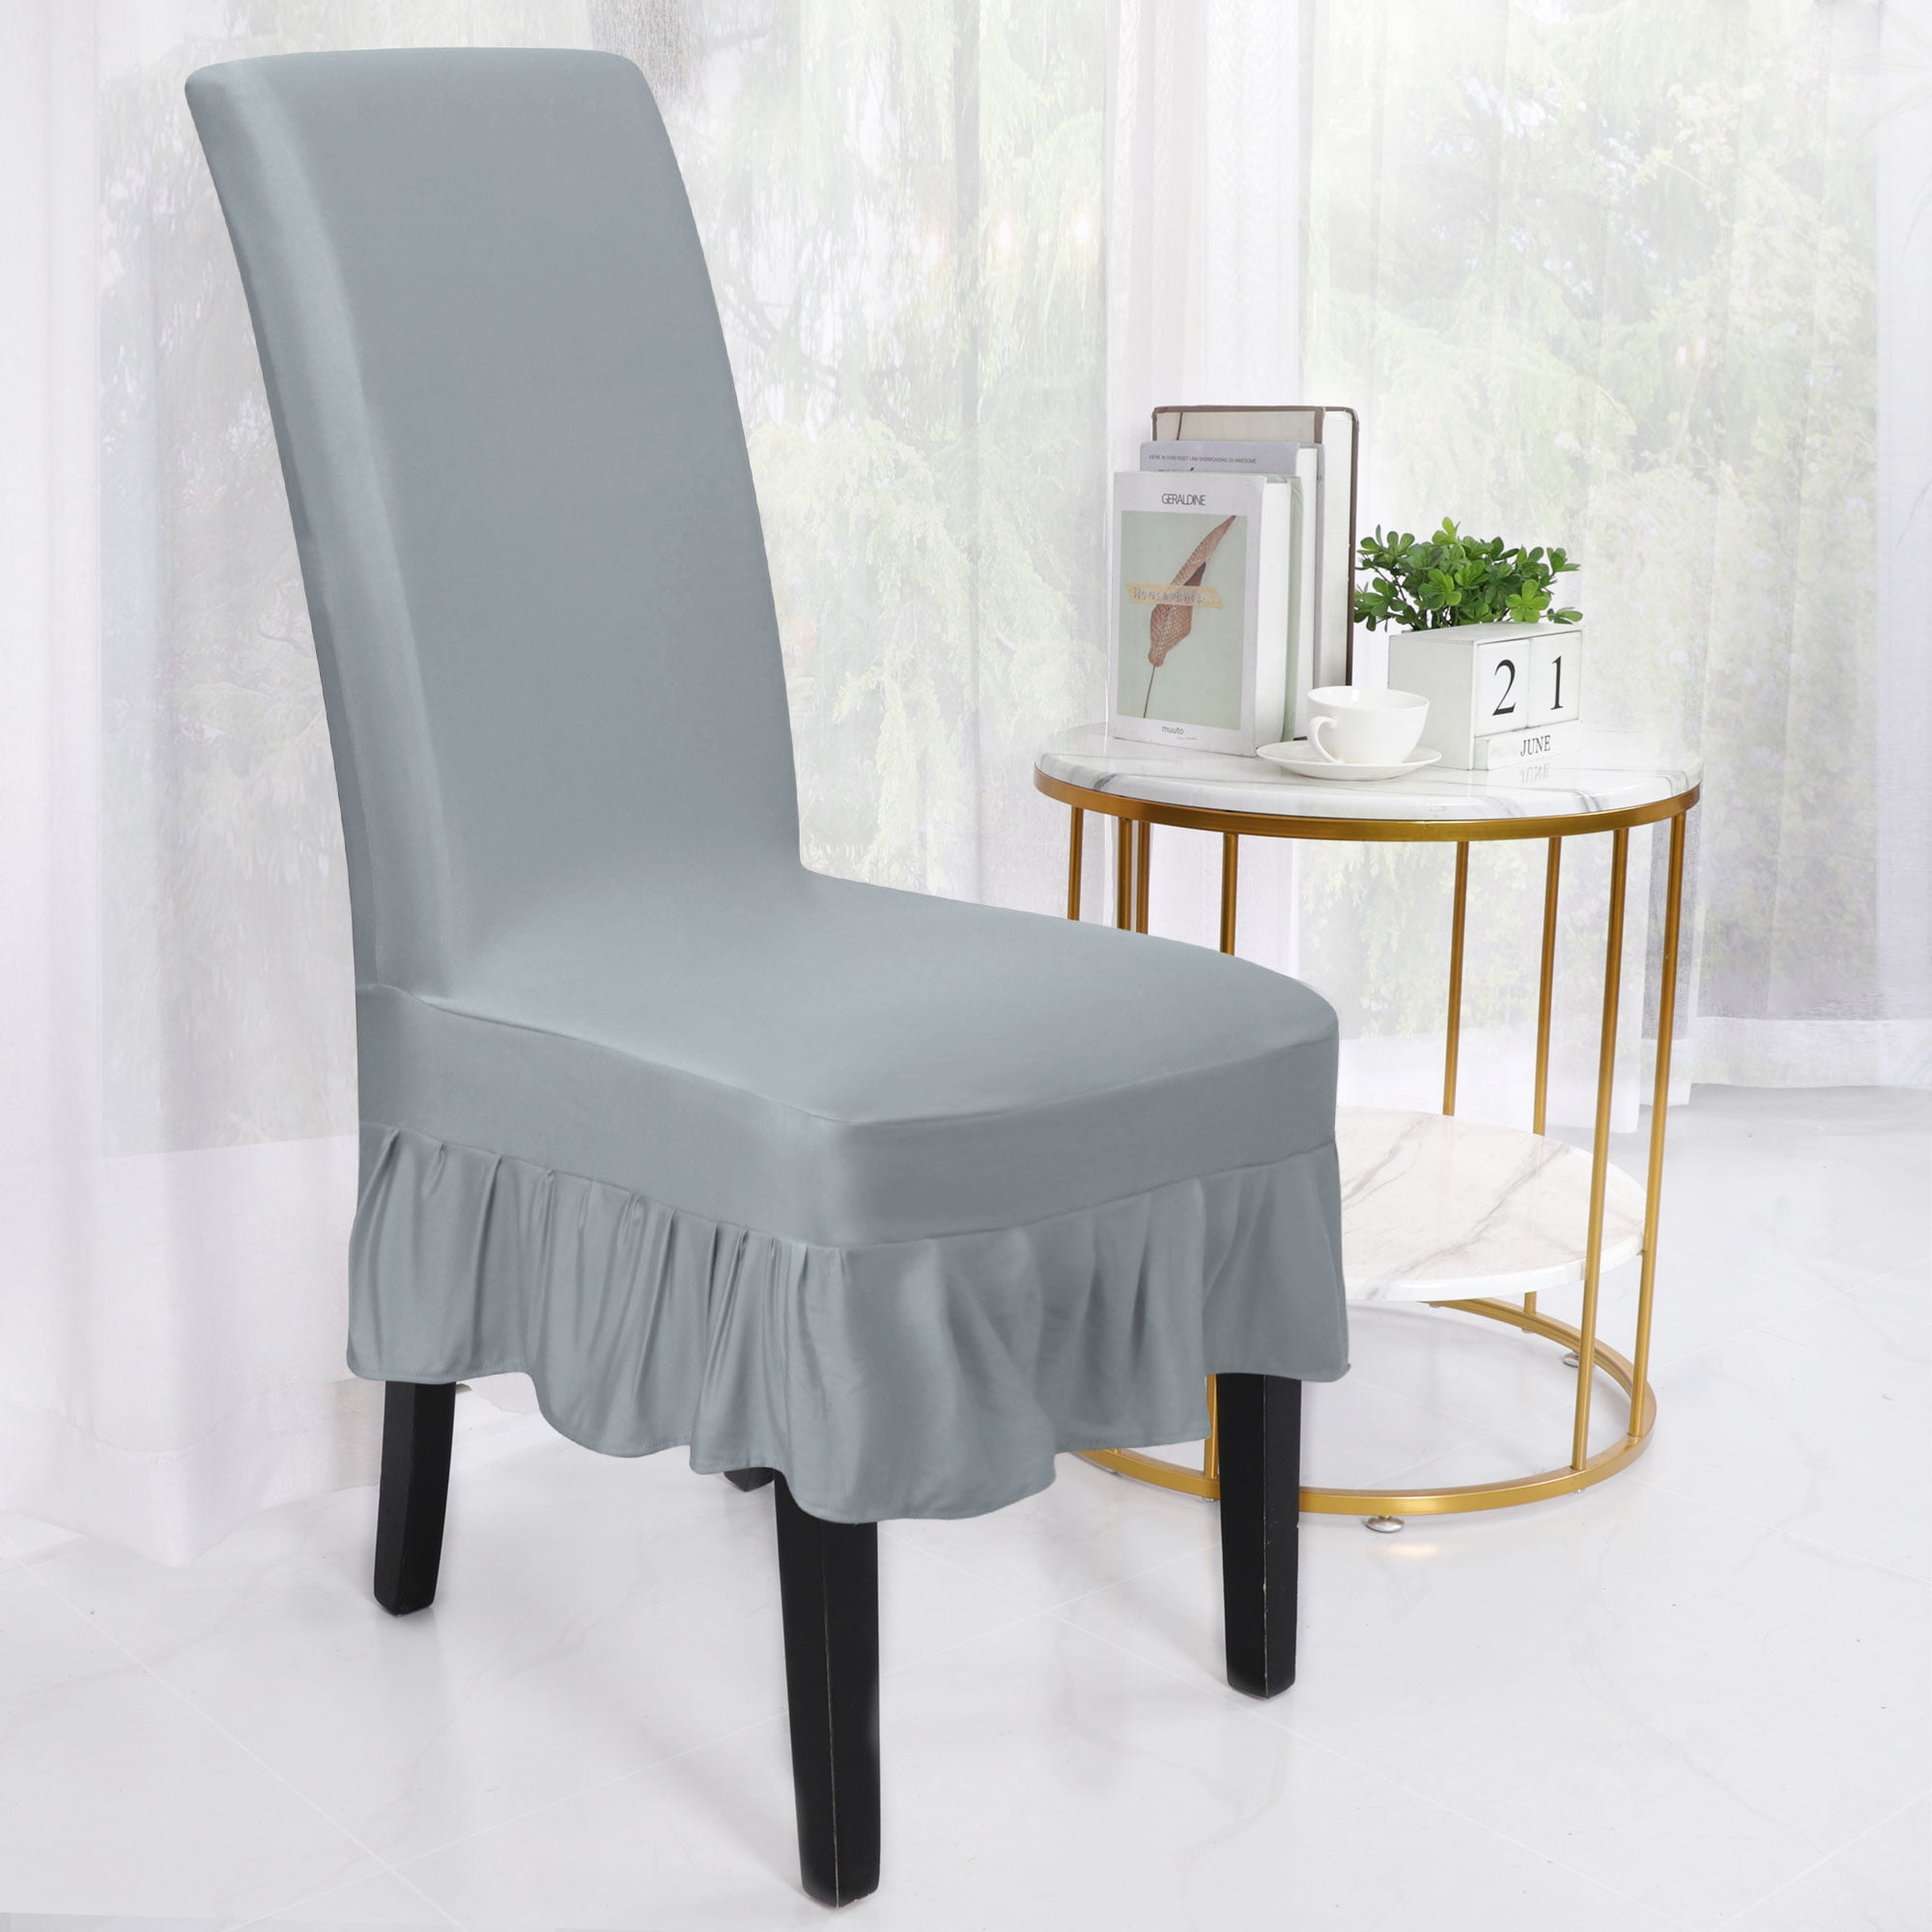 Details about   Velvet Chair Cover Spandex Elastic Chair Slipcover Dining Room Covers Seat Case 